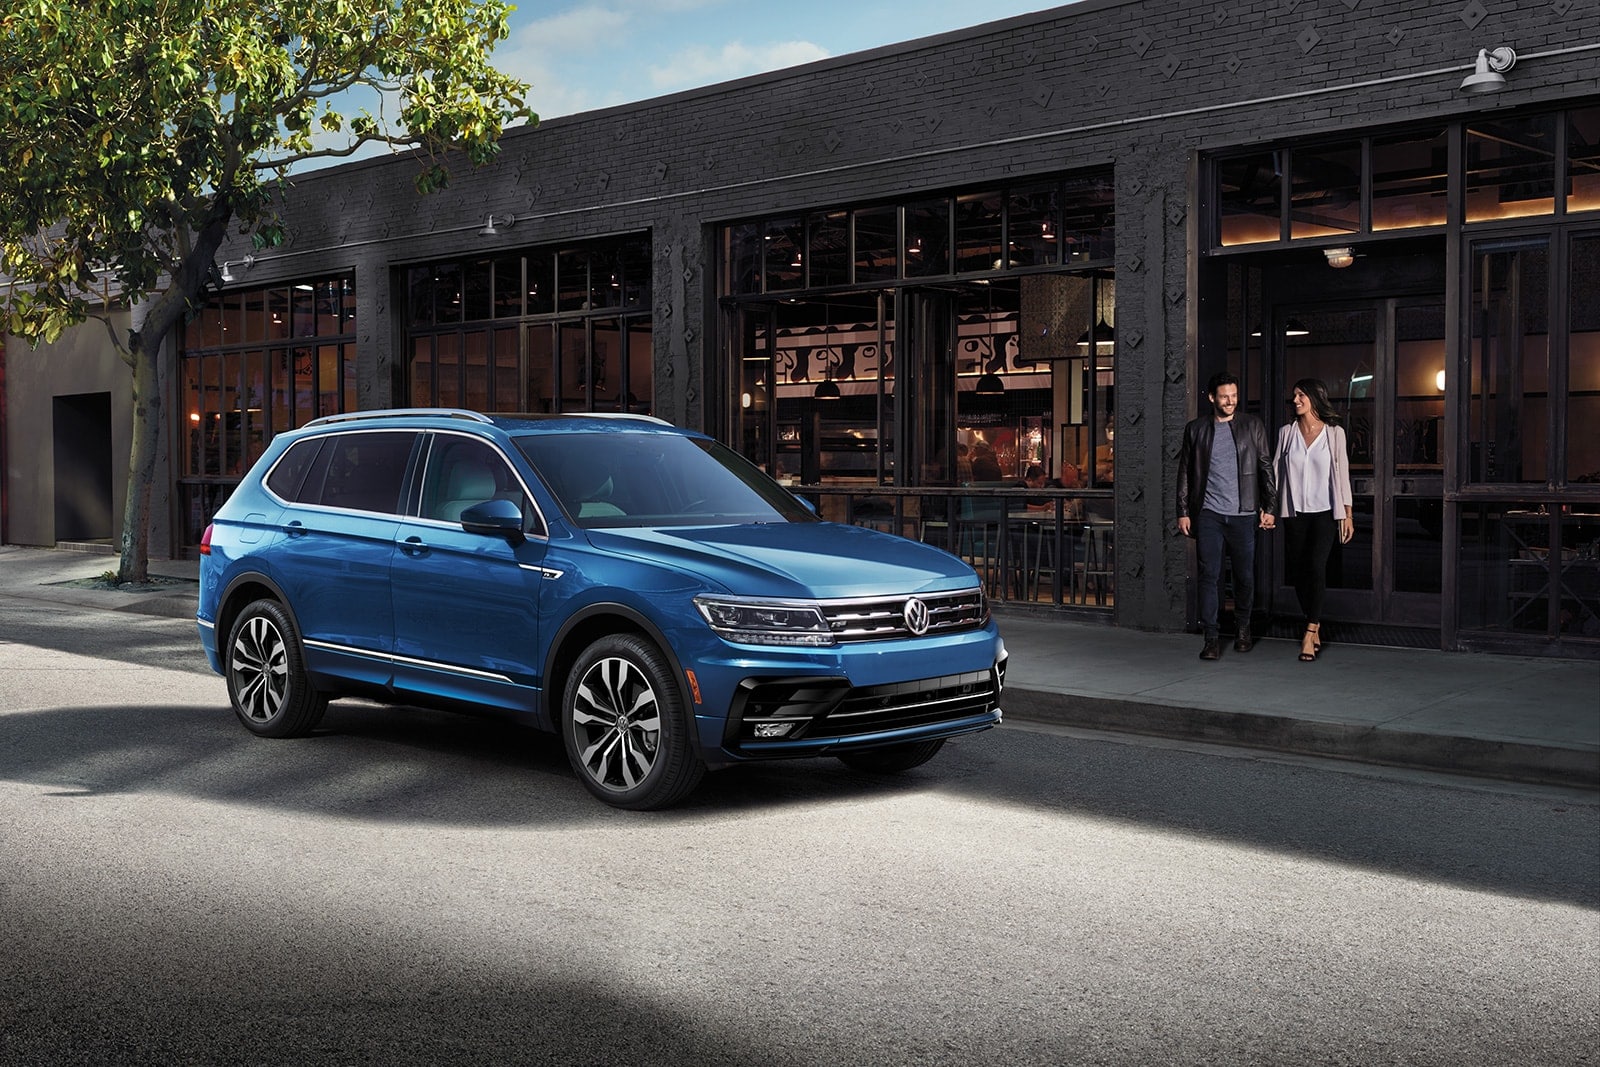 2022 Volkswagen Tiguan Trim Levels Compare and Find Out Which One is